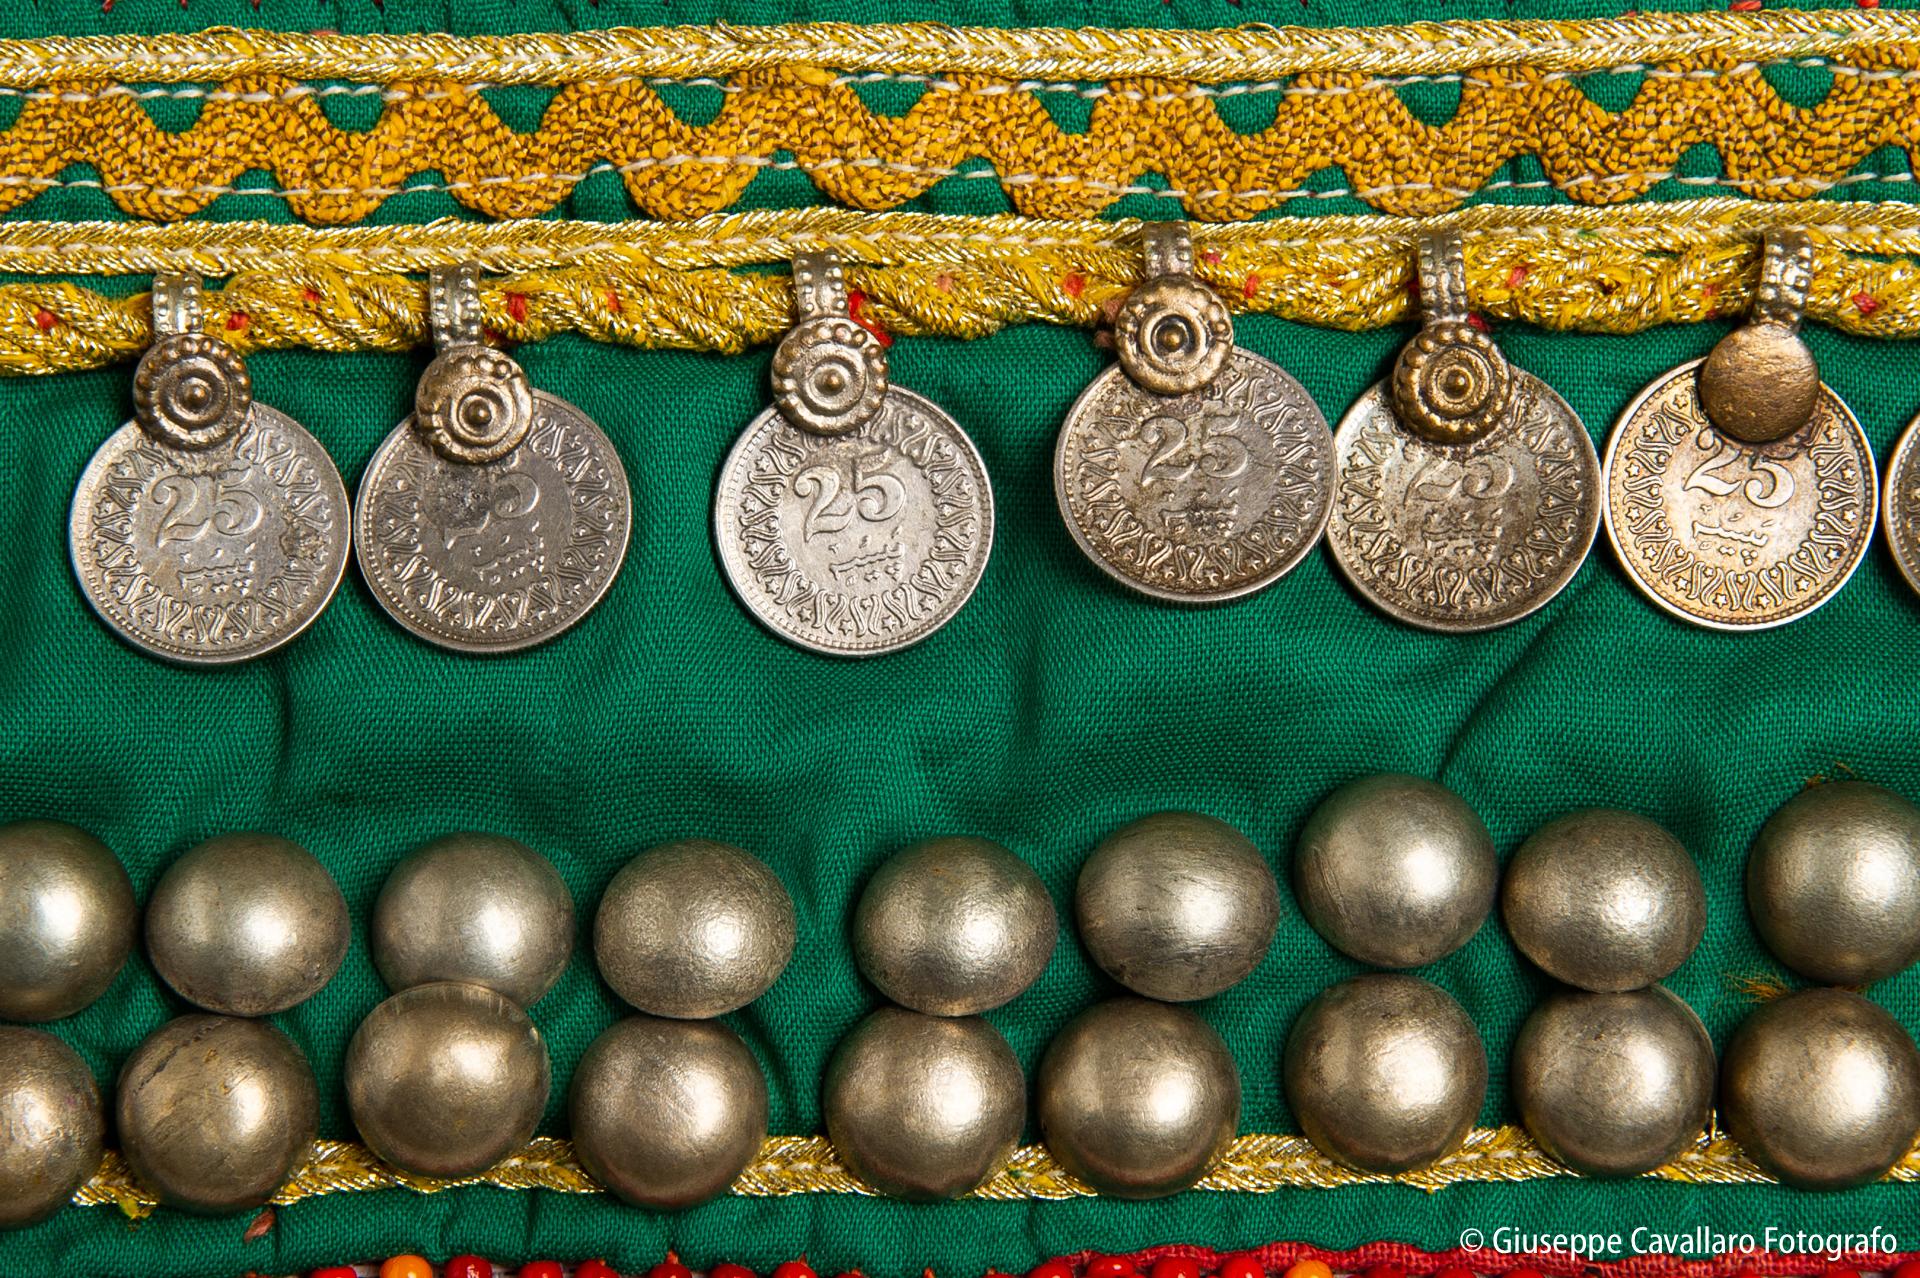 Hand-Woven Old Afghan Belts with Ancient Coins, also as Curtain-holders